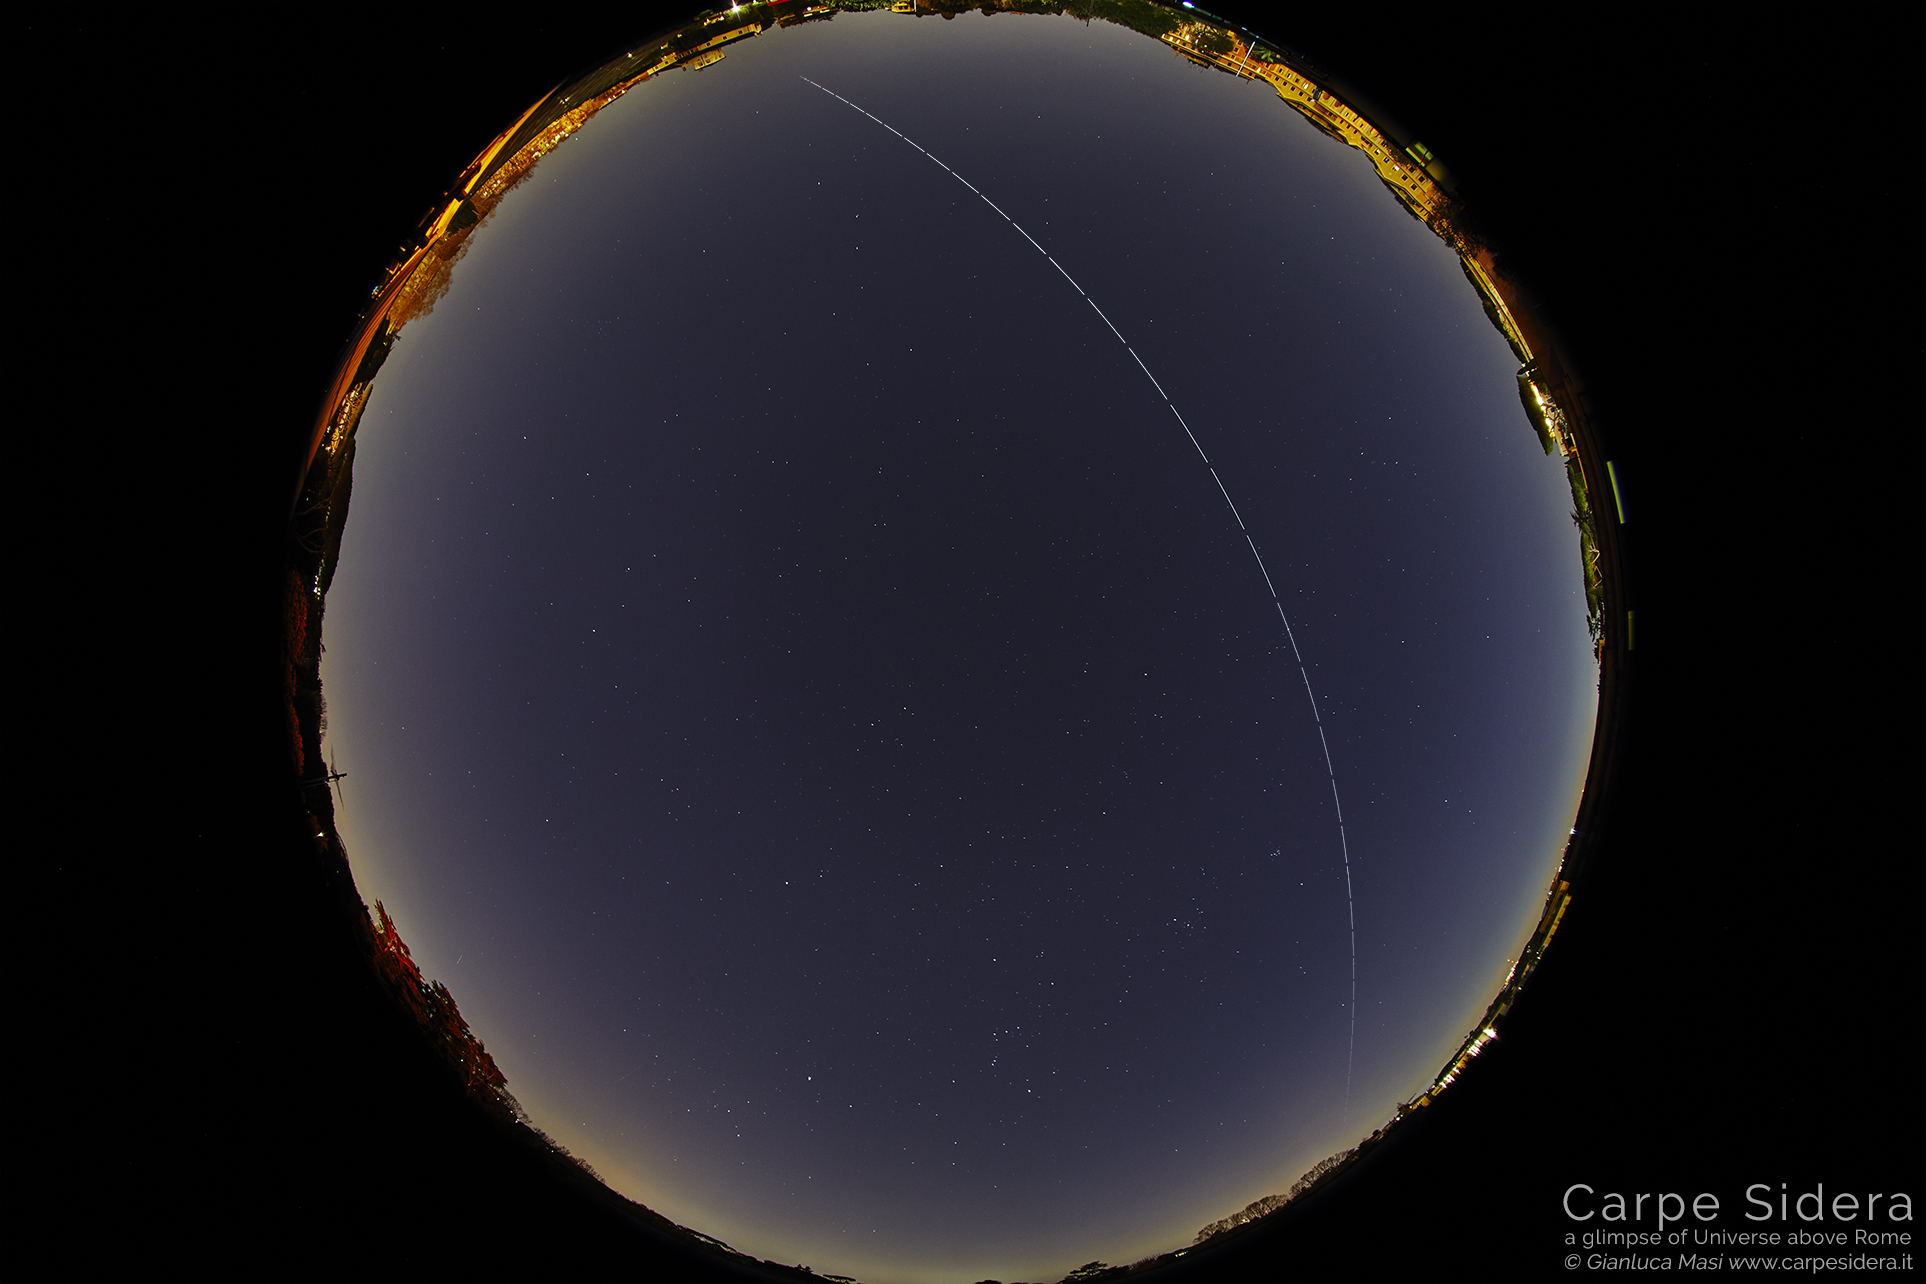 The International Space Station crosses the sky of Rome on 24 March 2019.